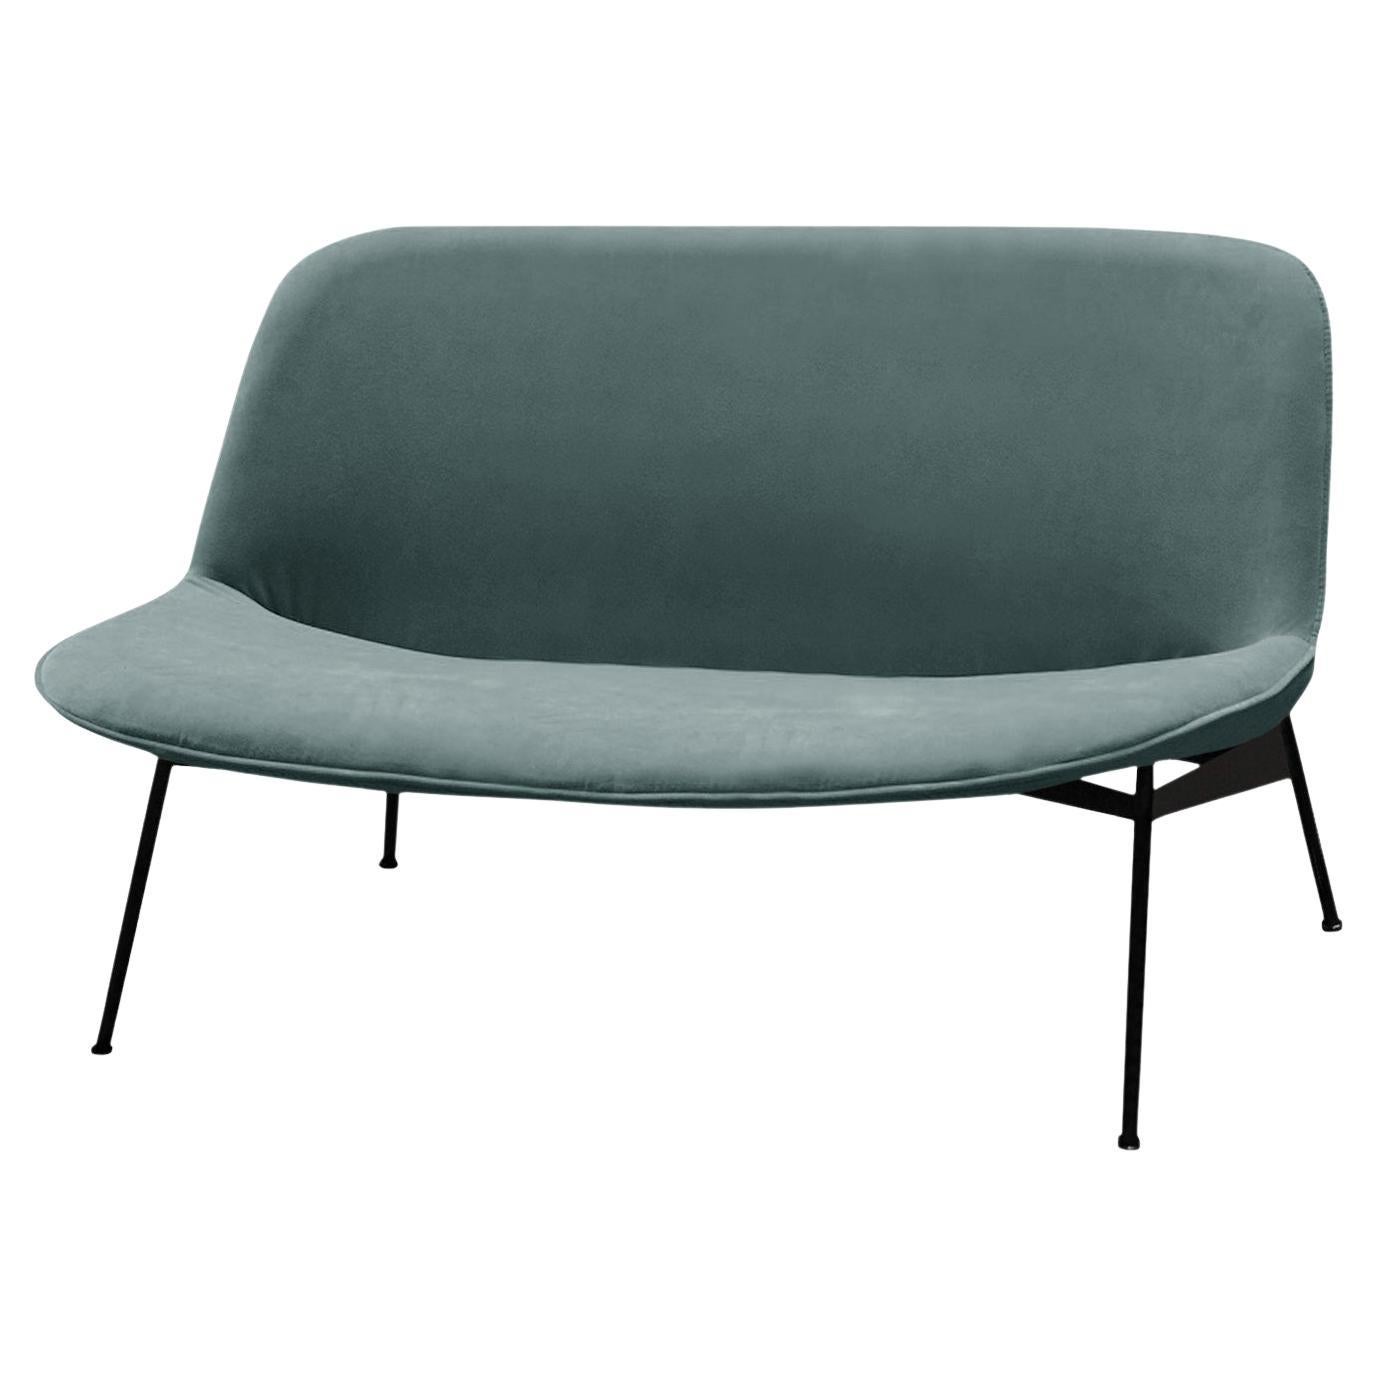 Chiado Sofa, Large with Teal and Black For Sale